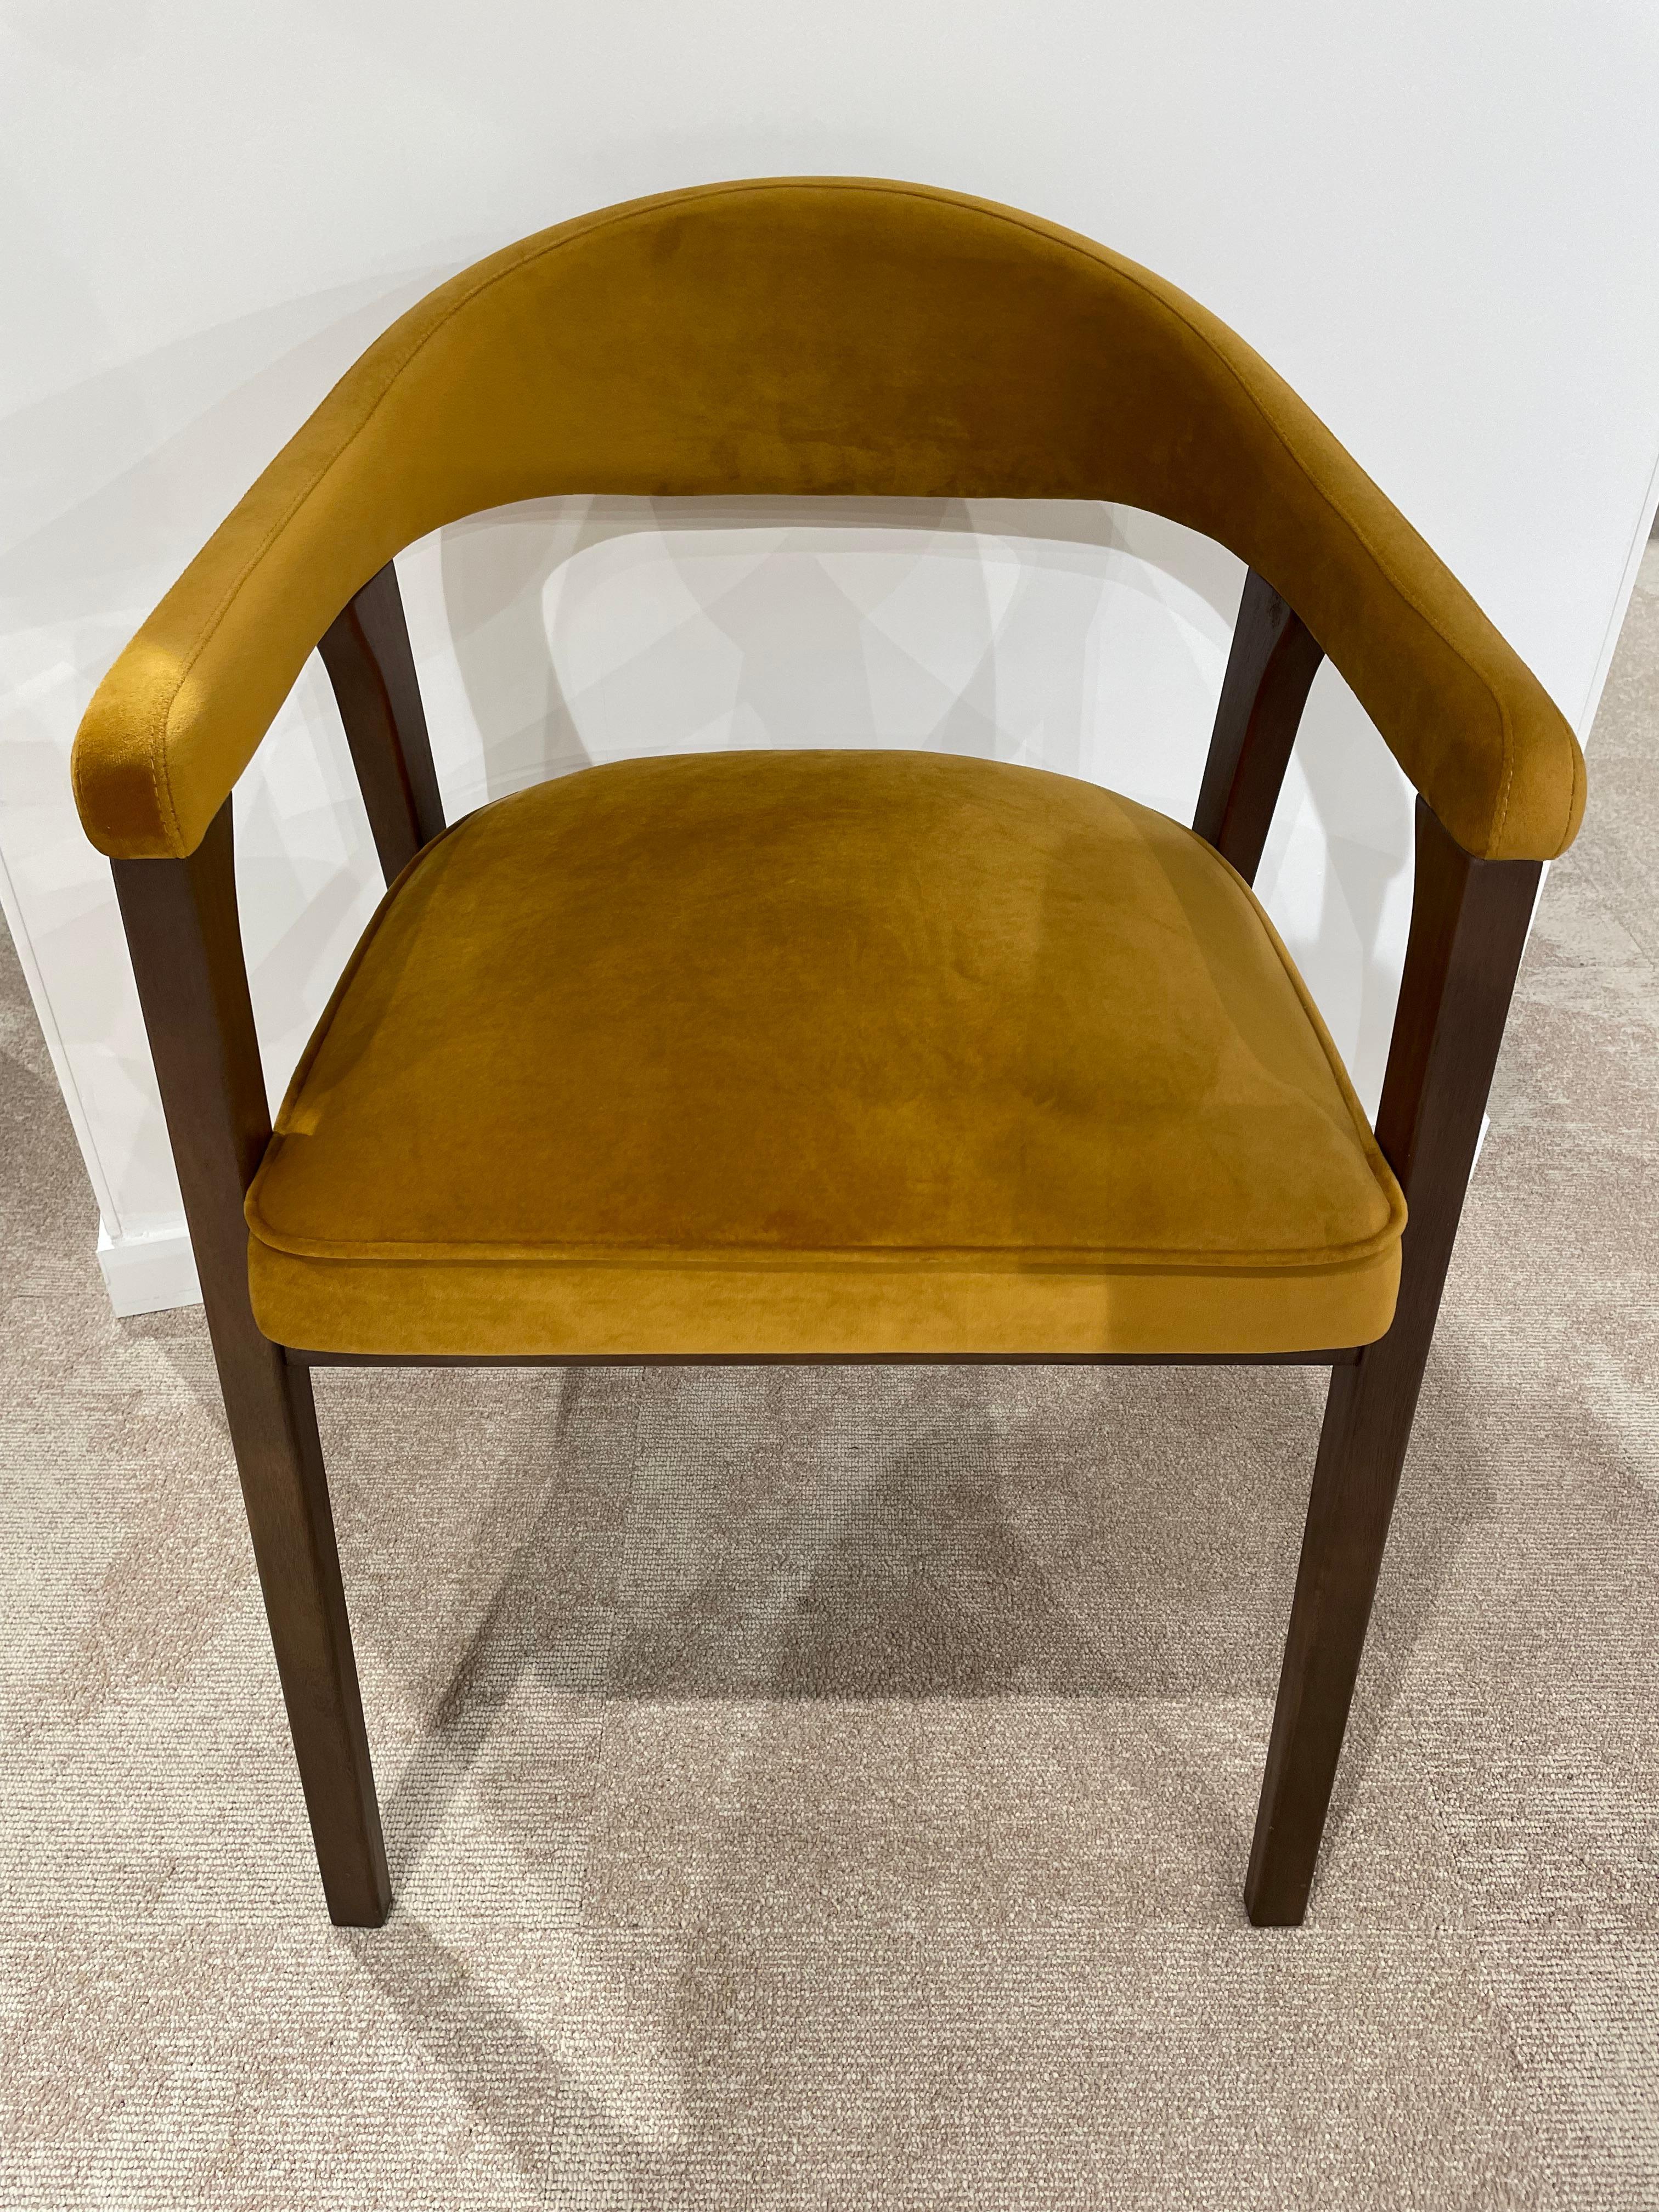 1960s Danish Design and Scandinavian Style Wooden and Velvet Fabric Chair For Sale 9